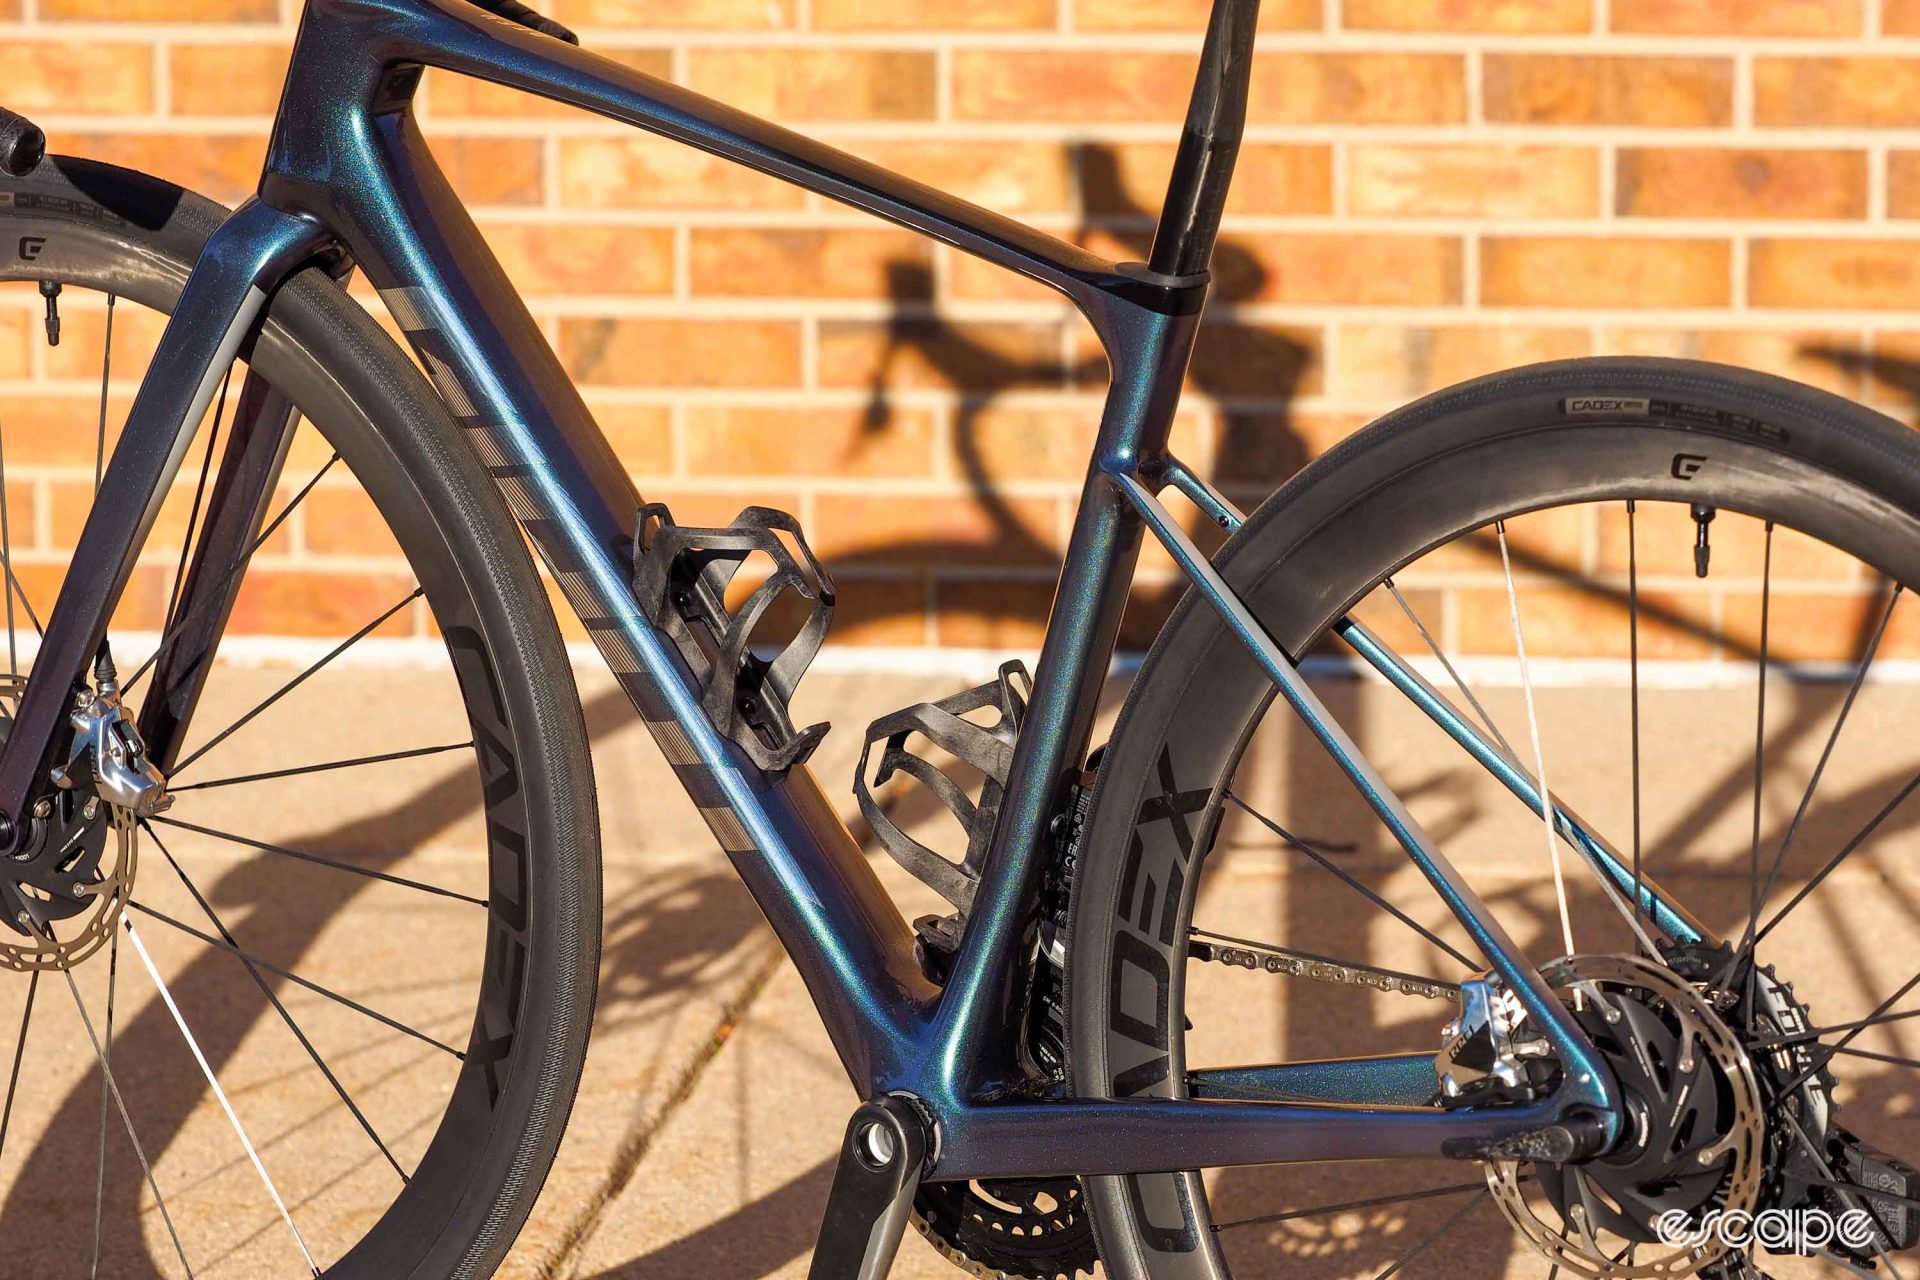 The 2024 Giant Defy Advanced SL in rear-quarter profile, showing the variation in tube size from top to bottom in the bike; tubes are notably beefier and more square at the bottom for stiffness, and thinner and rounder up top for compliance.